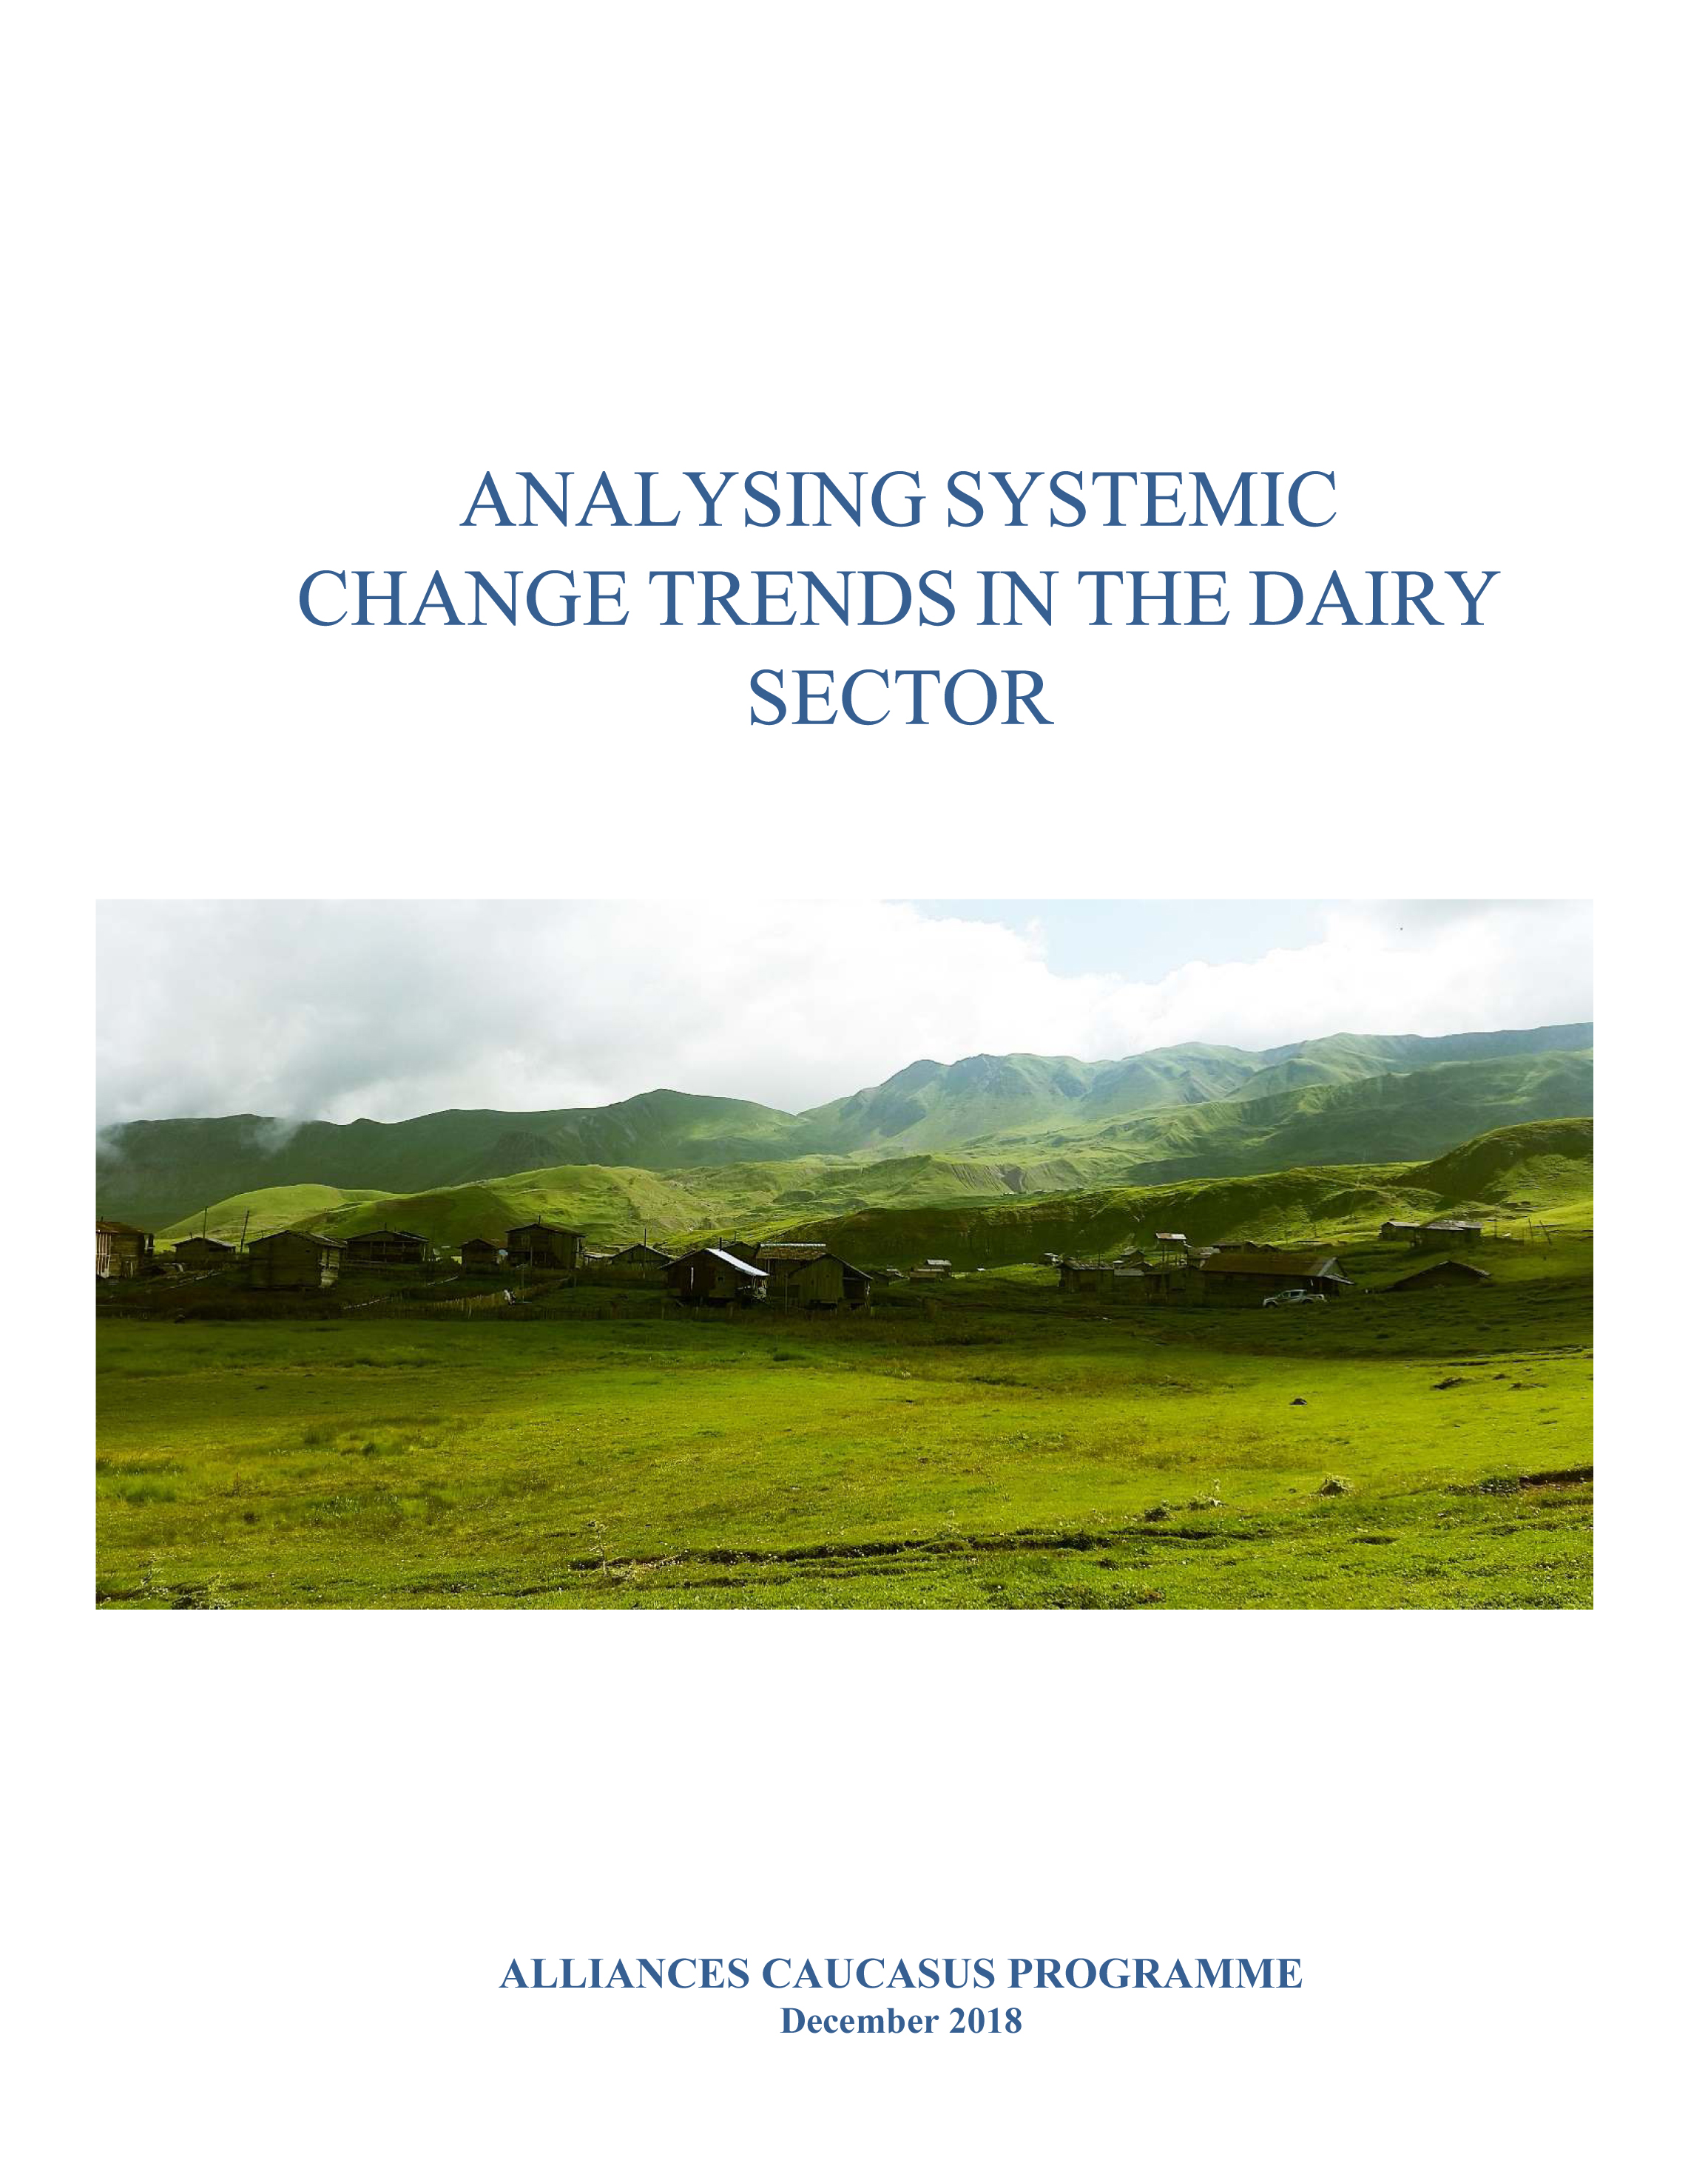 Analysing Systemic Change Trends in the Dairy Sector